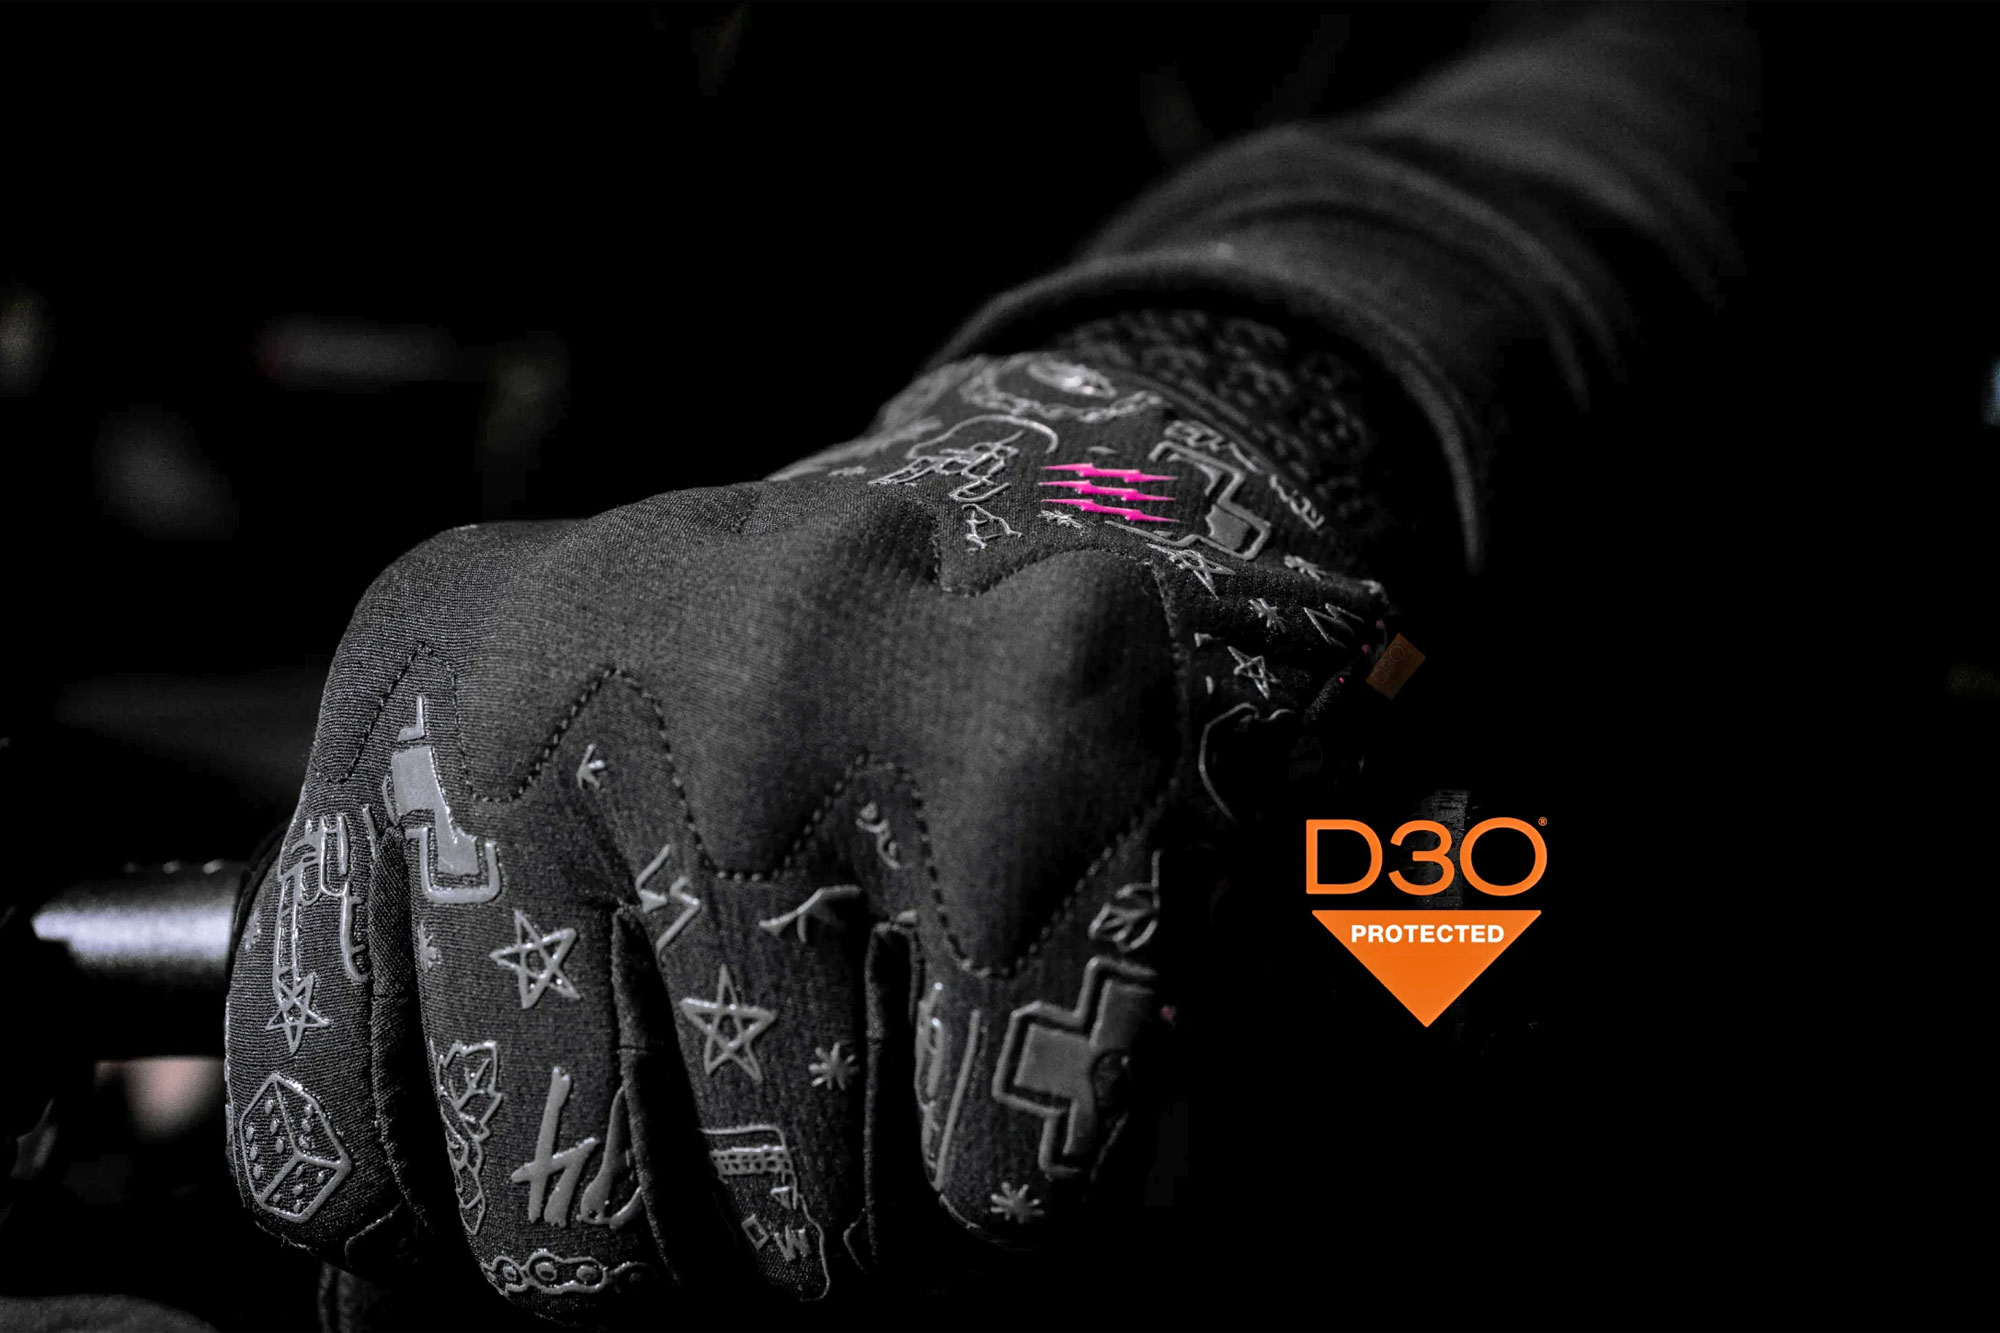 Muc-Off Protects Your Knuckles with D3O Rider Gloves, Plus Winter Gloves Too